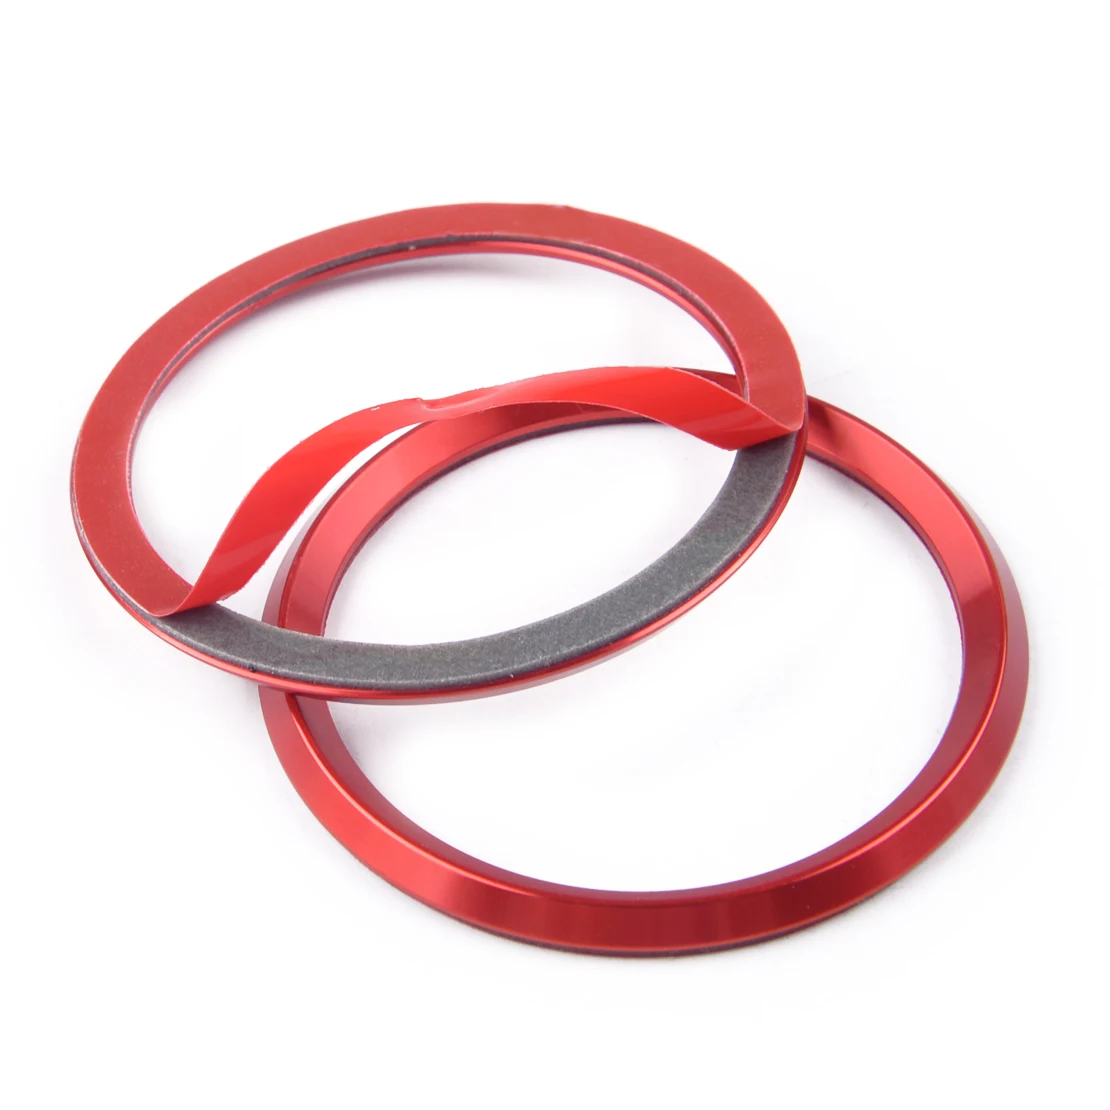 CITALL 4Pcs Red Aluminum Wheel Center Hub Ring Cover Trim Car Styling Fit For Mazda3 Mazda6 CX-5 CX-3